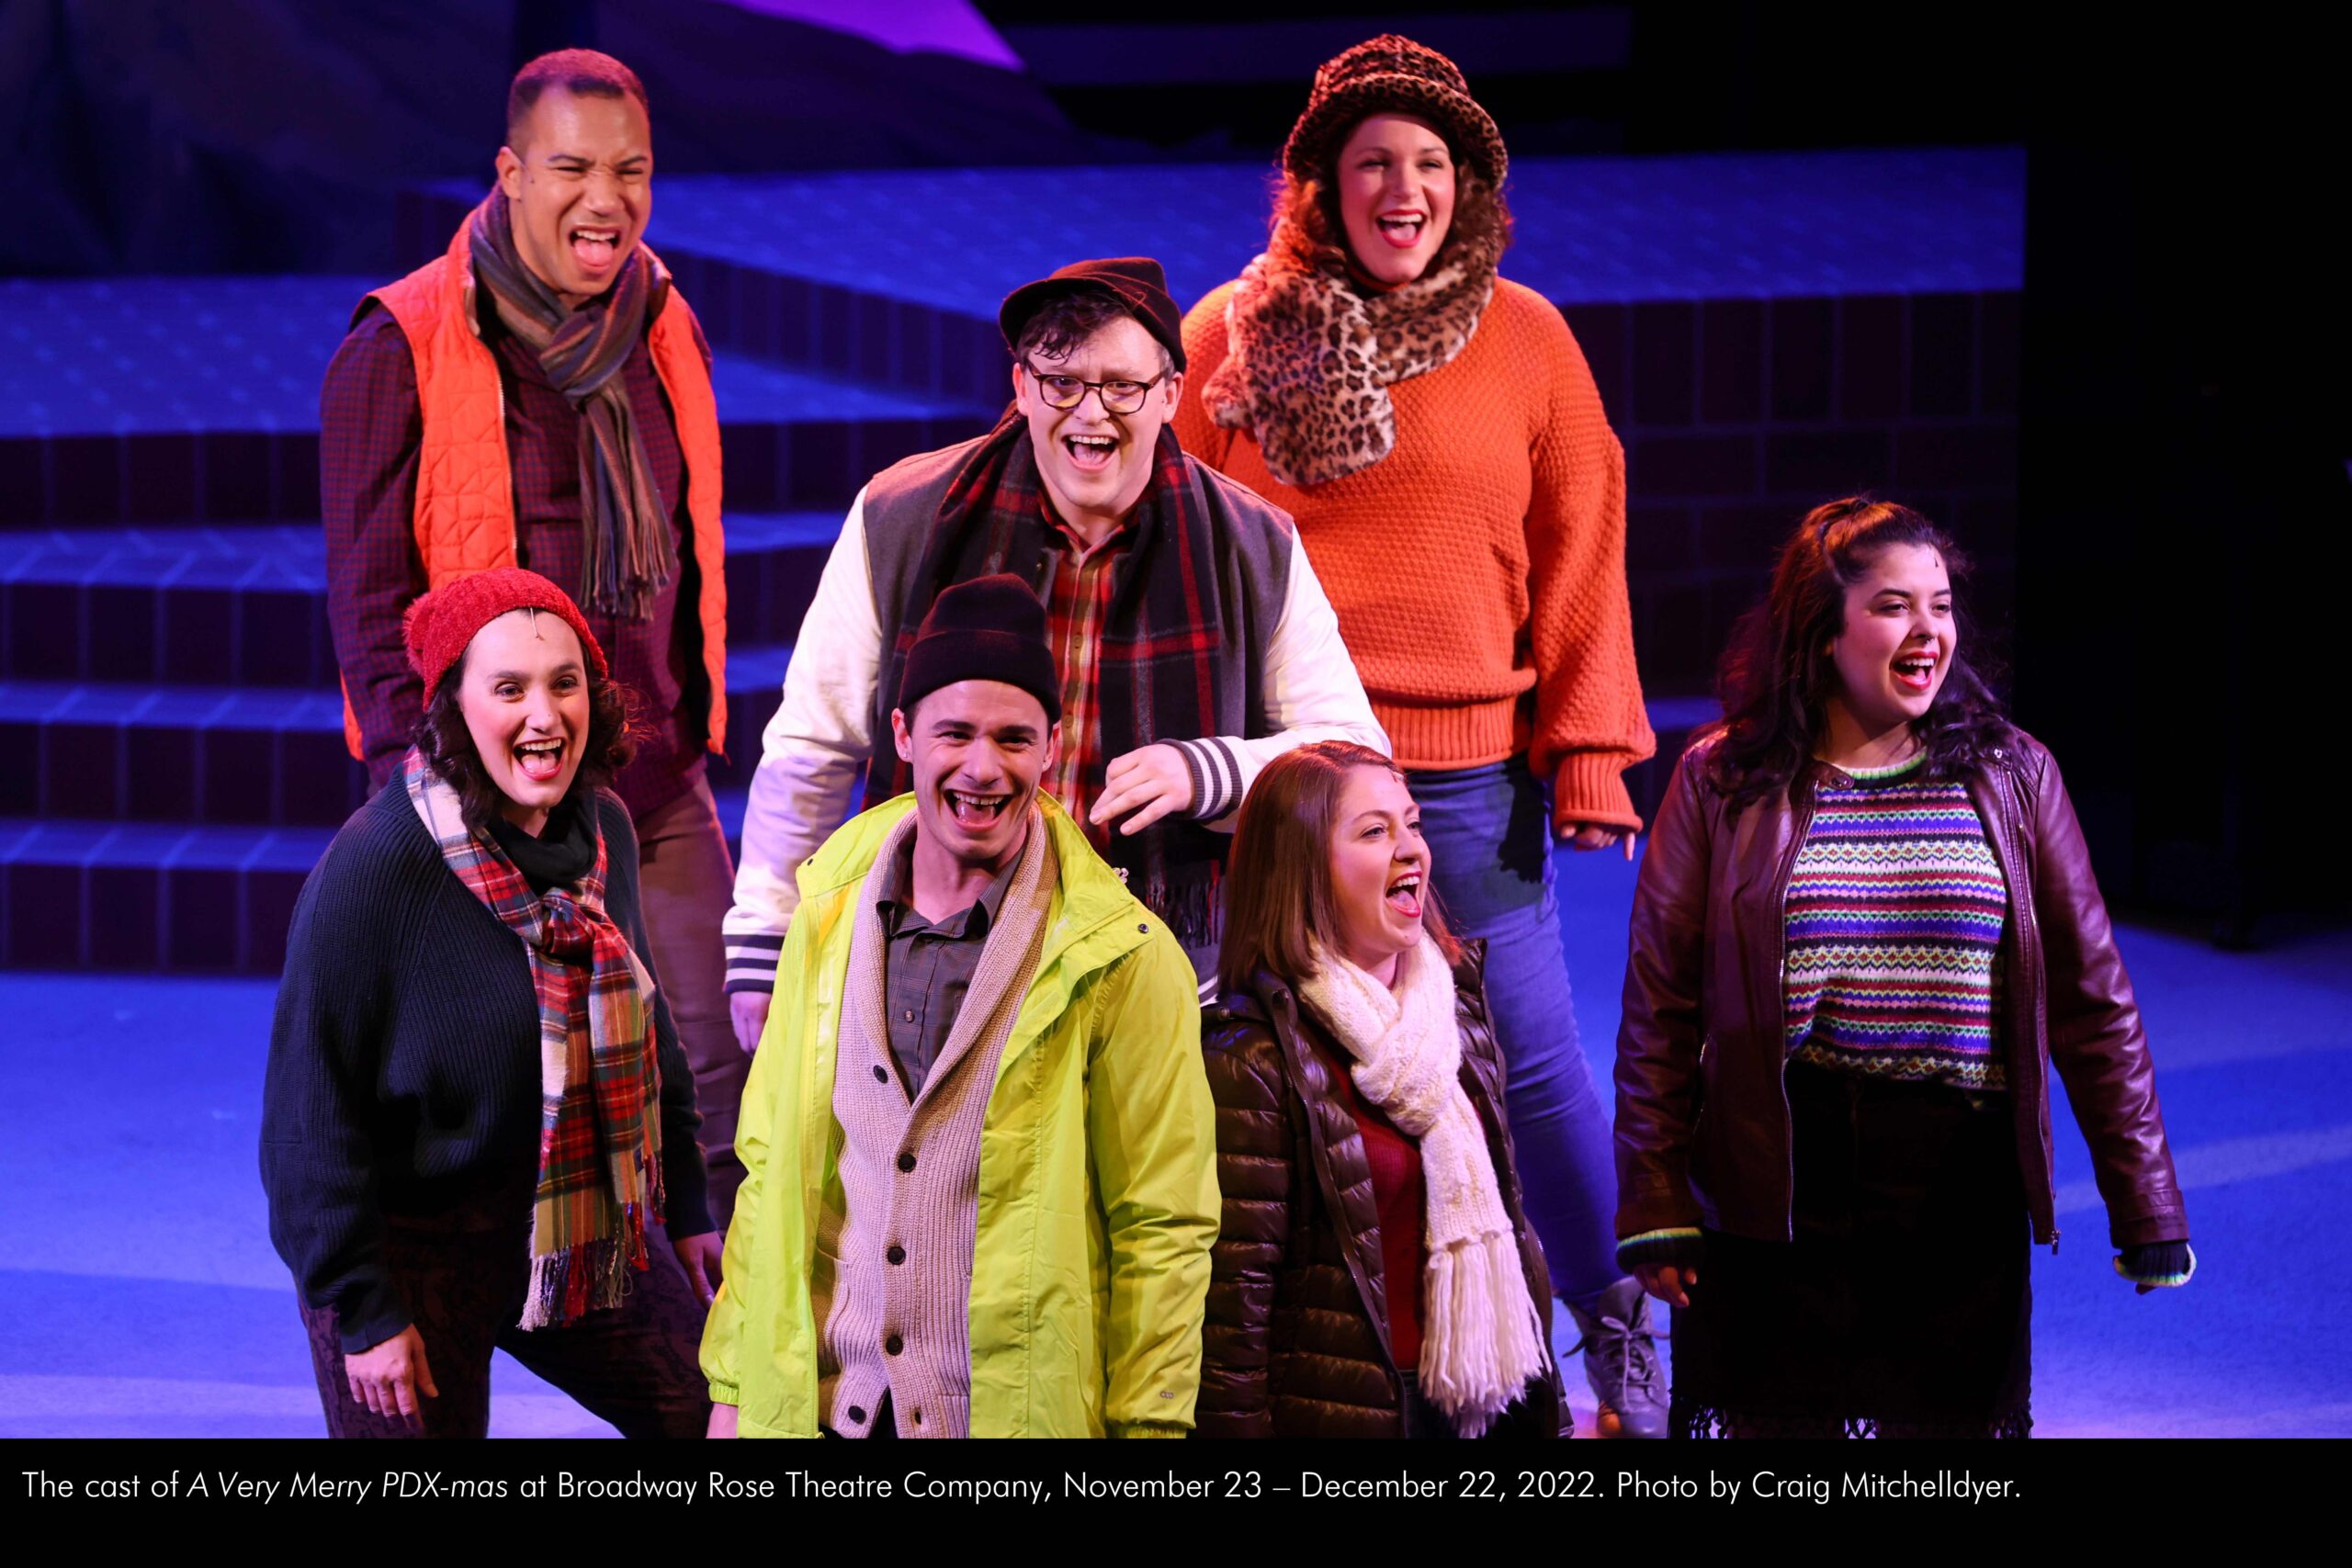 The cast of "A Very Merry PDX-mas" at Broadway Rose Theatre Company, November 23 - December 22, 2022. Photo by Craig Mitchelldyer.